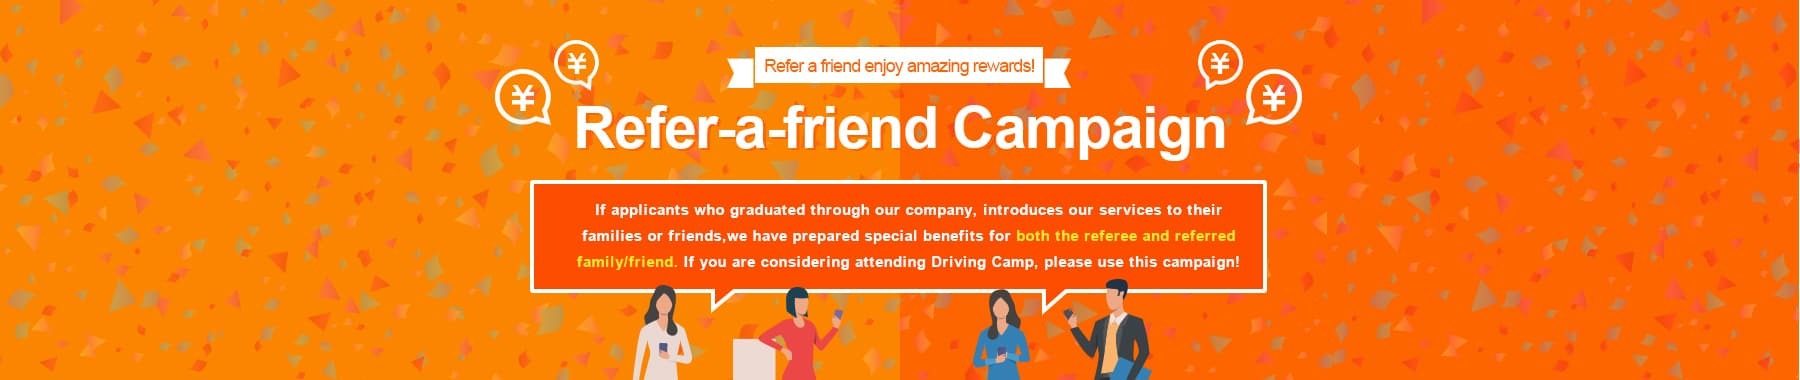 With our Refer-a-Friend Campaign, the referrer, and the referred can both enjoy special benefits! Refer your friends or family to enjoy special benefits! If anyone you know considering acquiring a license through driving camp, please use our services and enjoy the benefits.